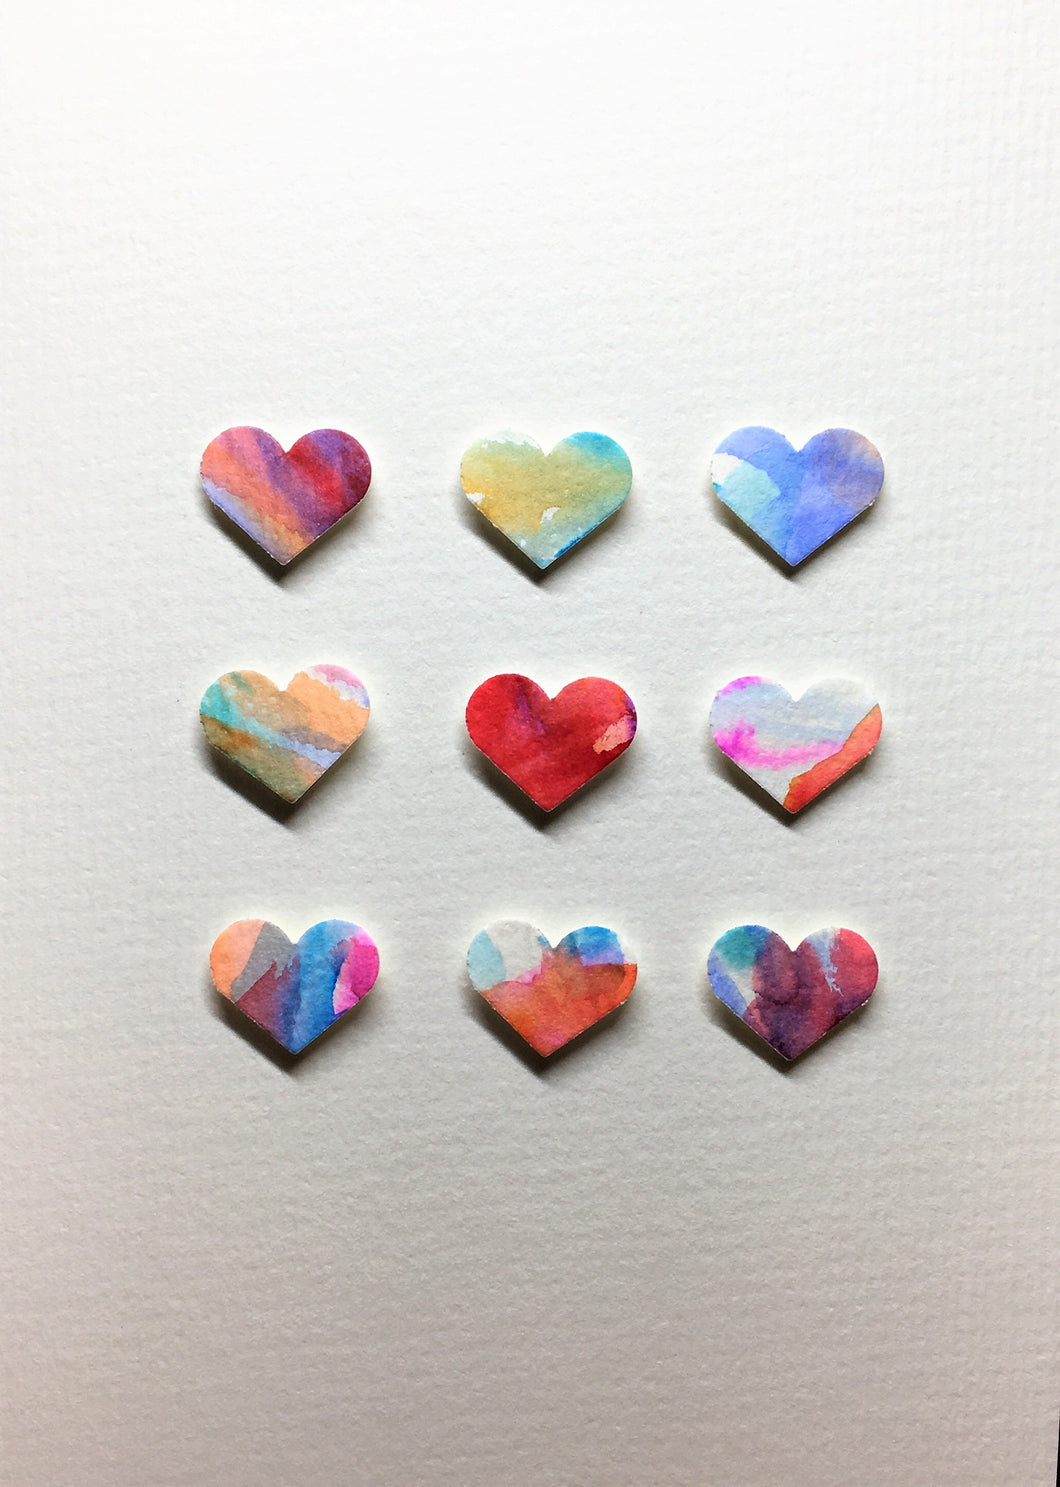 Hand-painted greeting card - Multicoloured hearts in square design - eDgE dEsiGn London